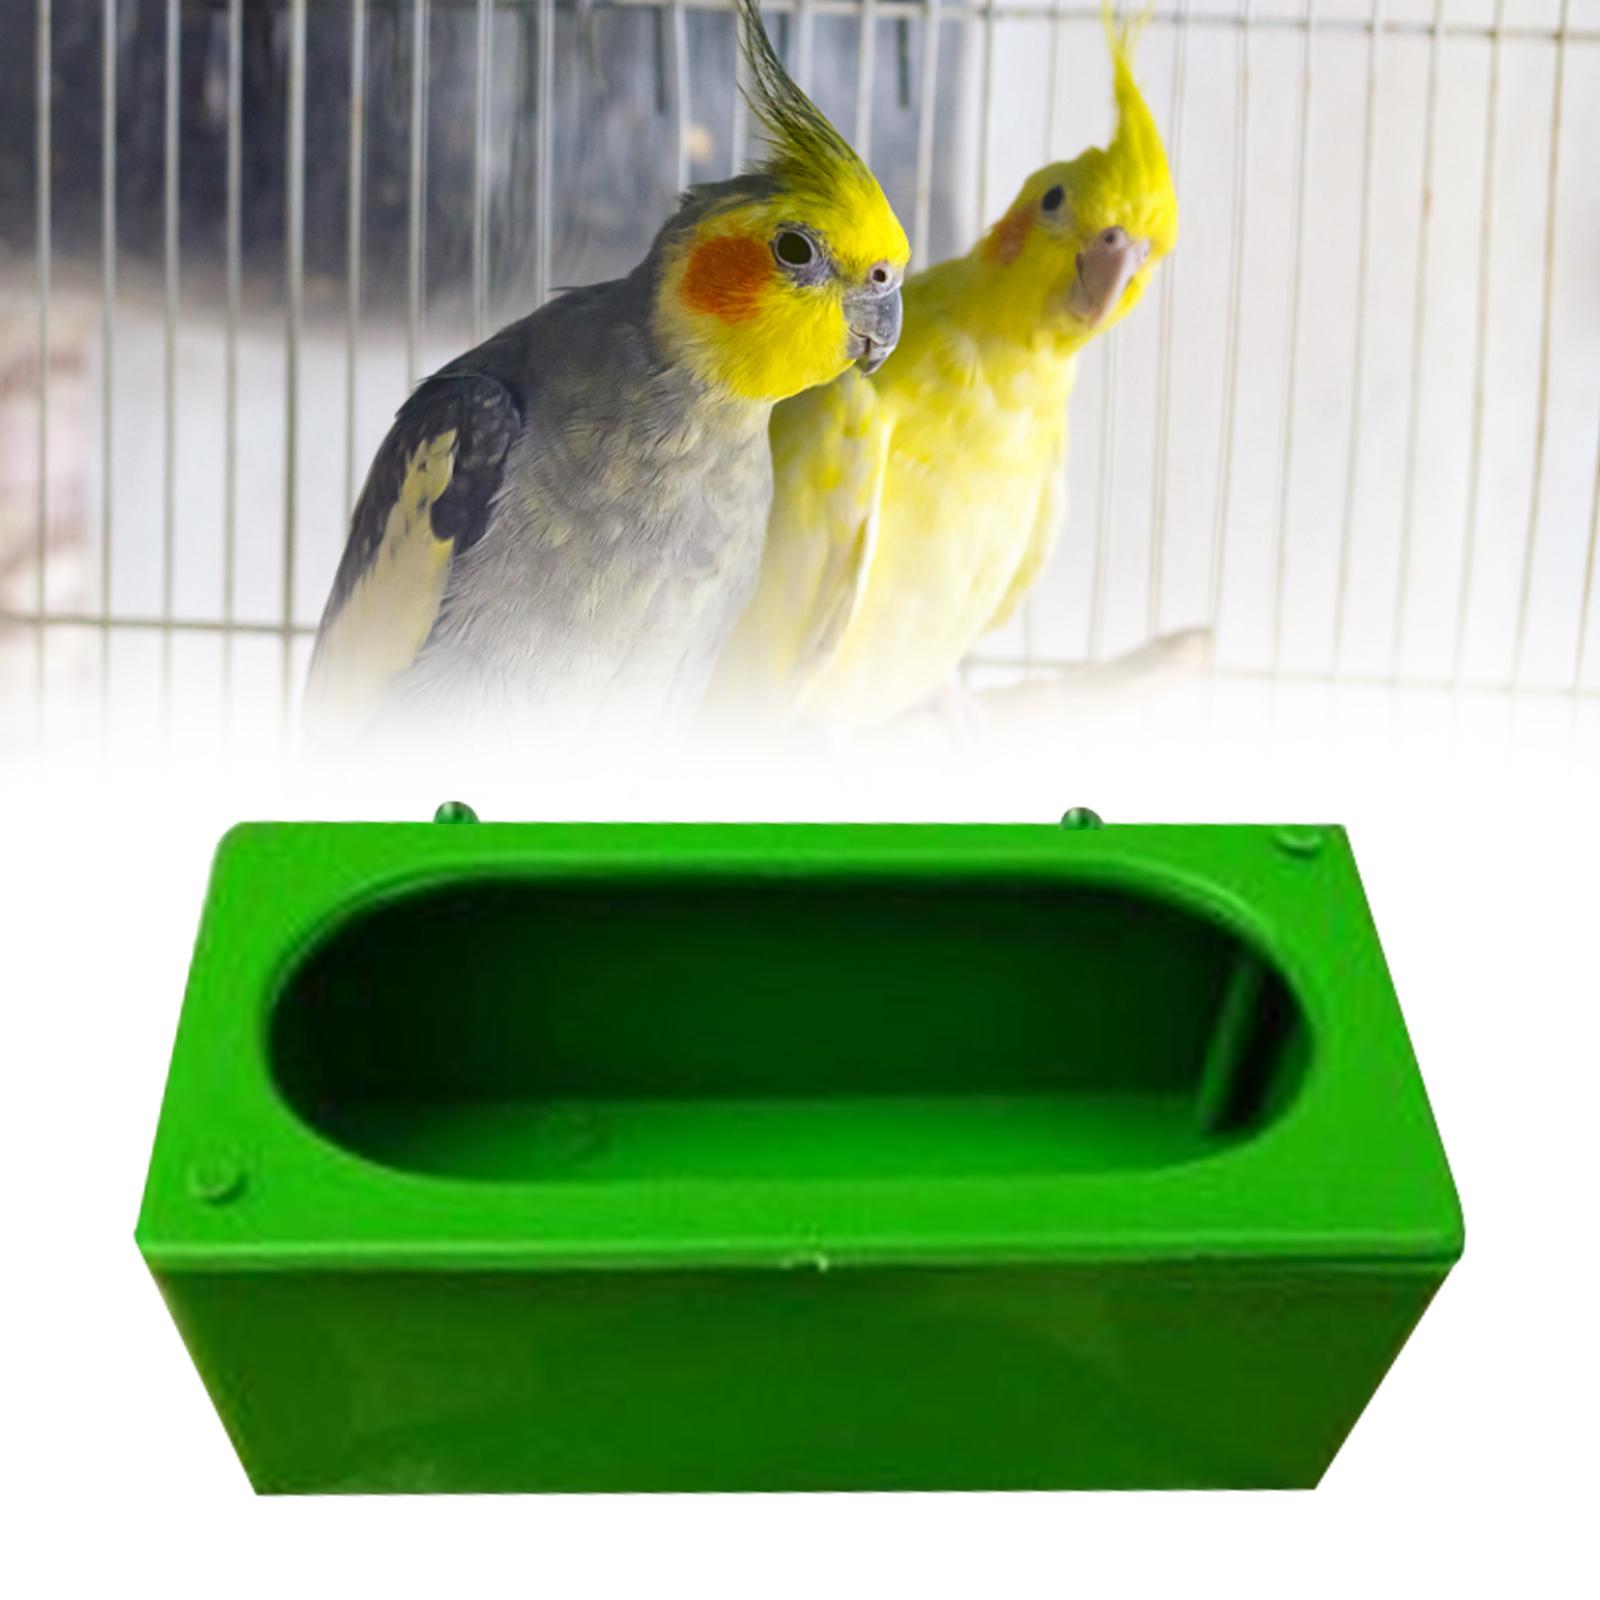 Bird Feeding Dish Cups Parrot Food Bowl, Water Bowl for Parakeet African Greys Cockatiels Lovebird Budgie Chinchilla ,